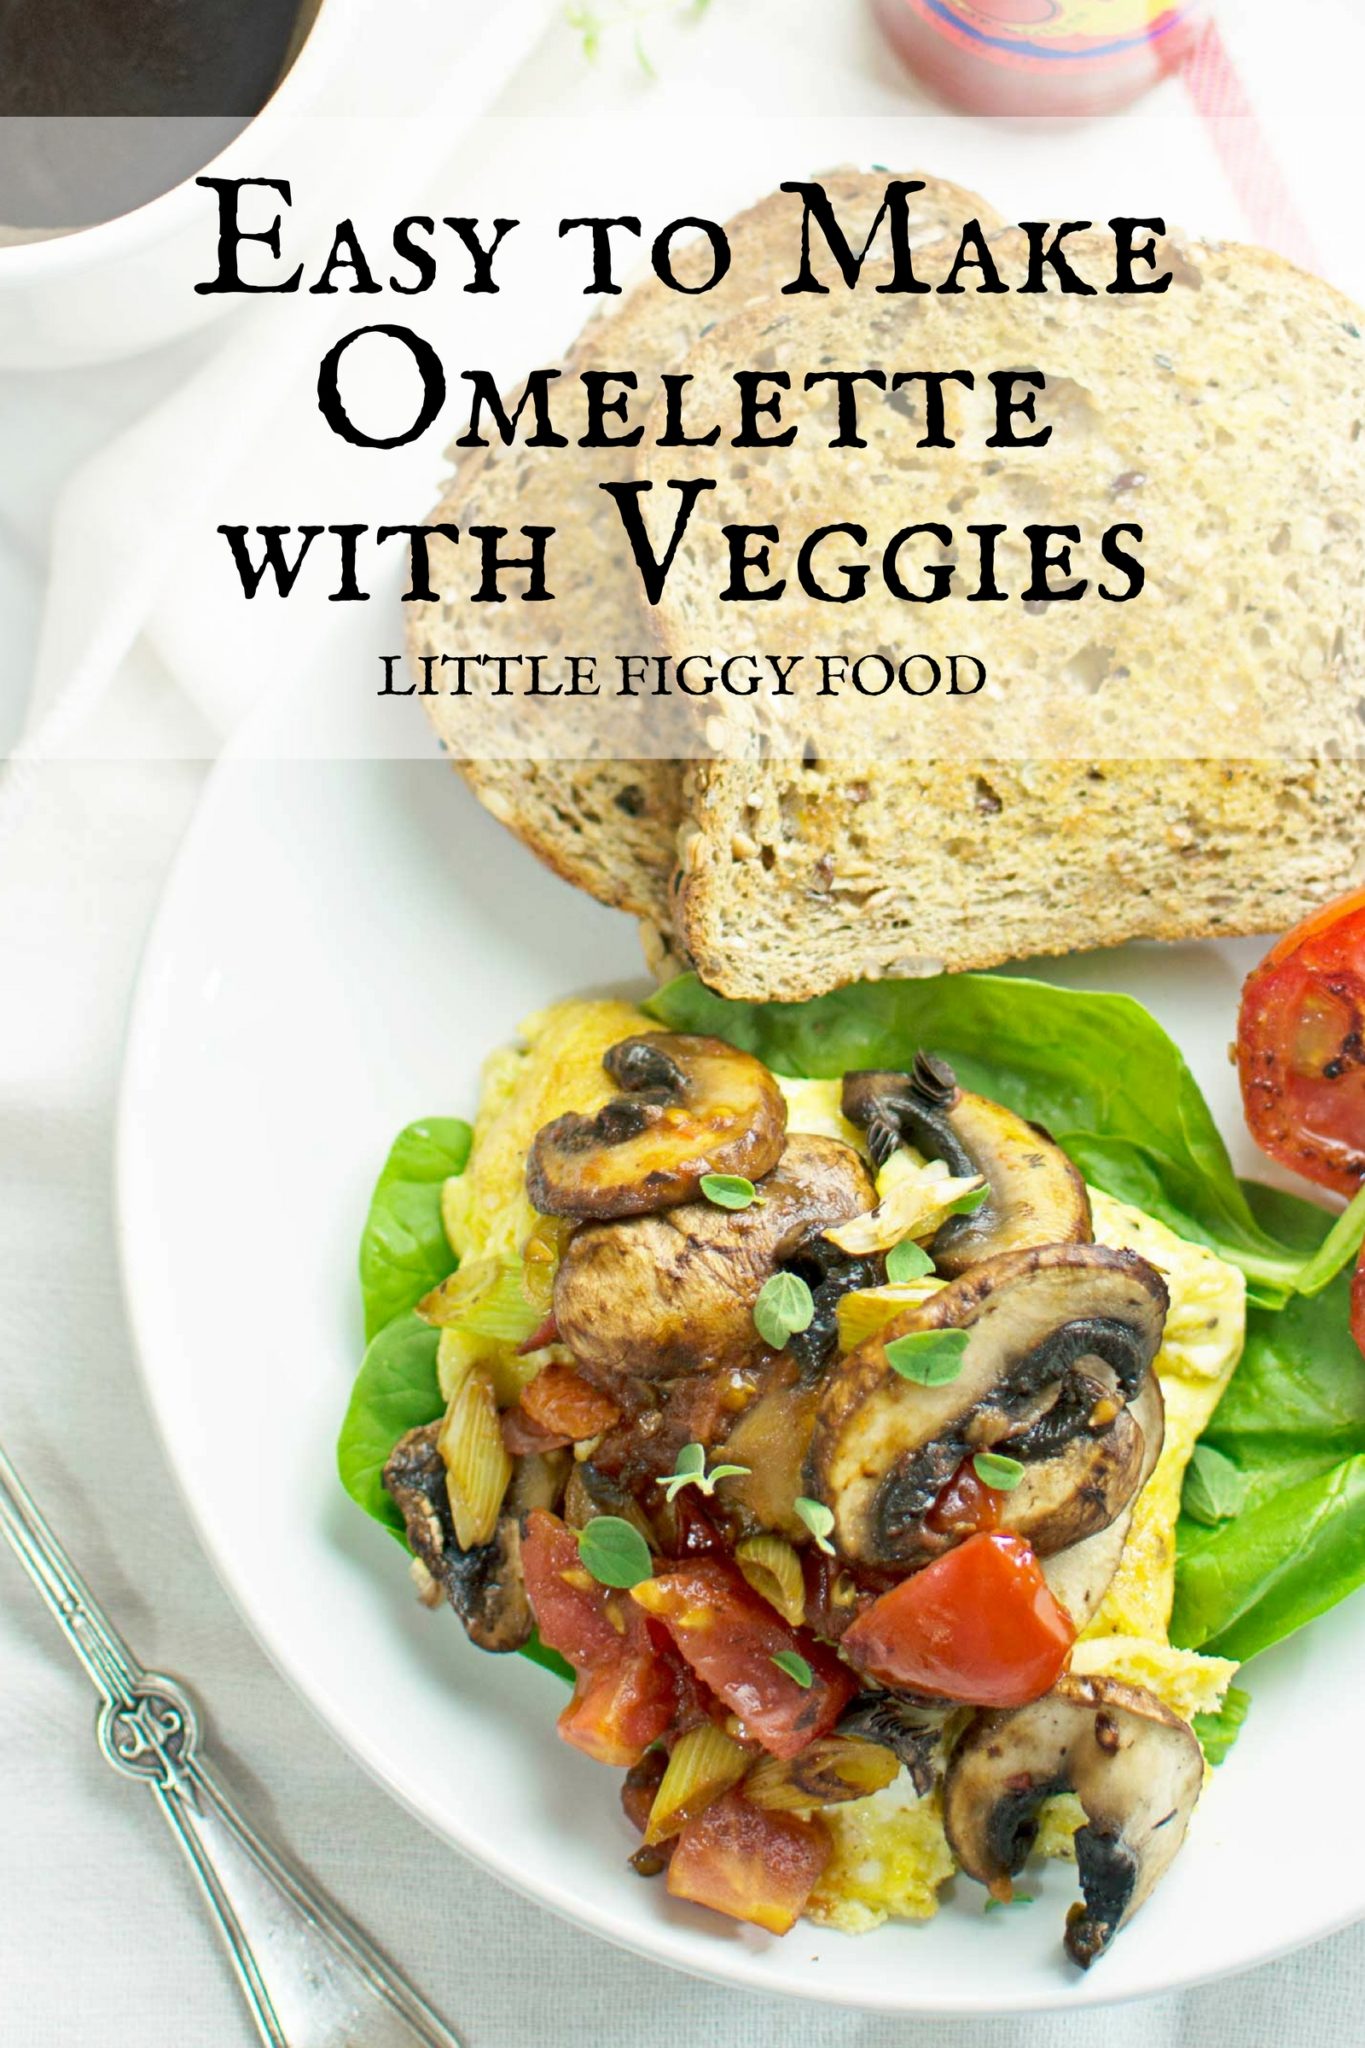 Try this Easy to Make Omelette with lots of Veggies! A tasty way to start your day or enjoy as a light dinner. Find the recipe @LittleFiggyFood